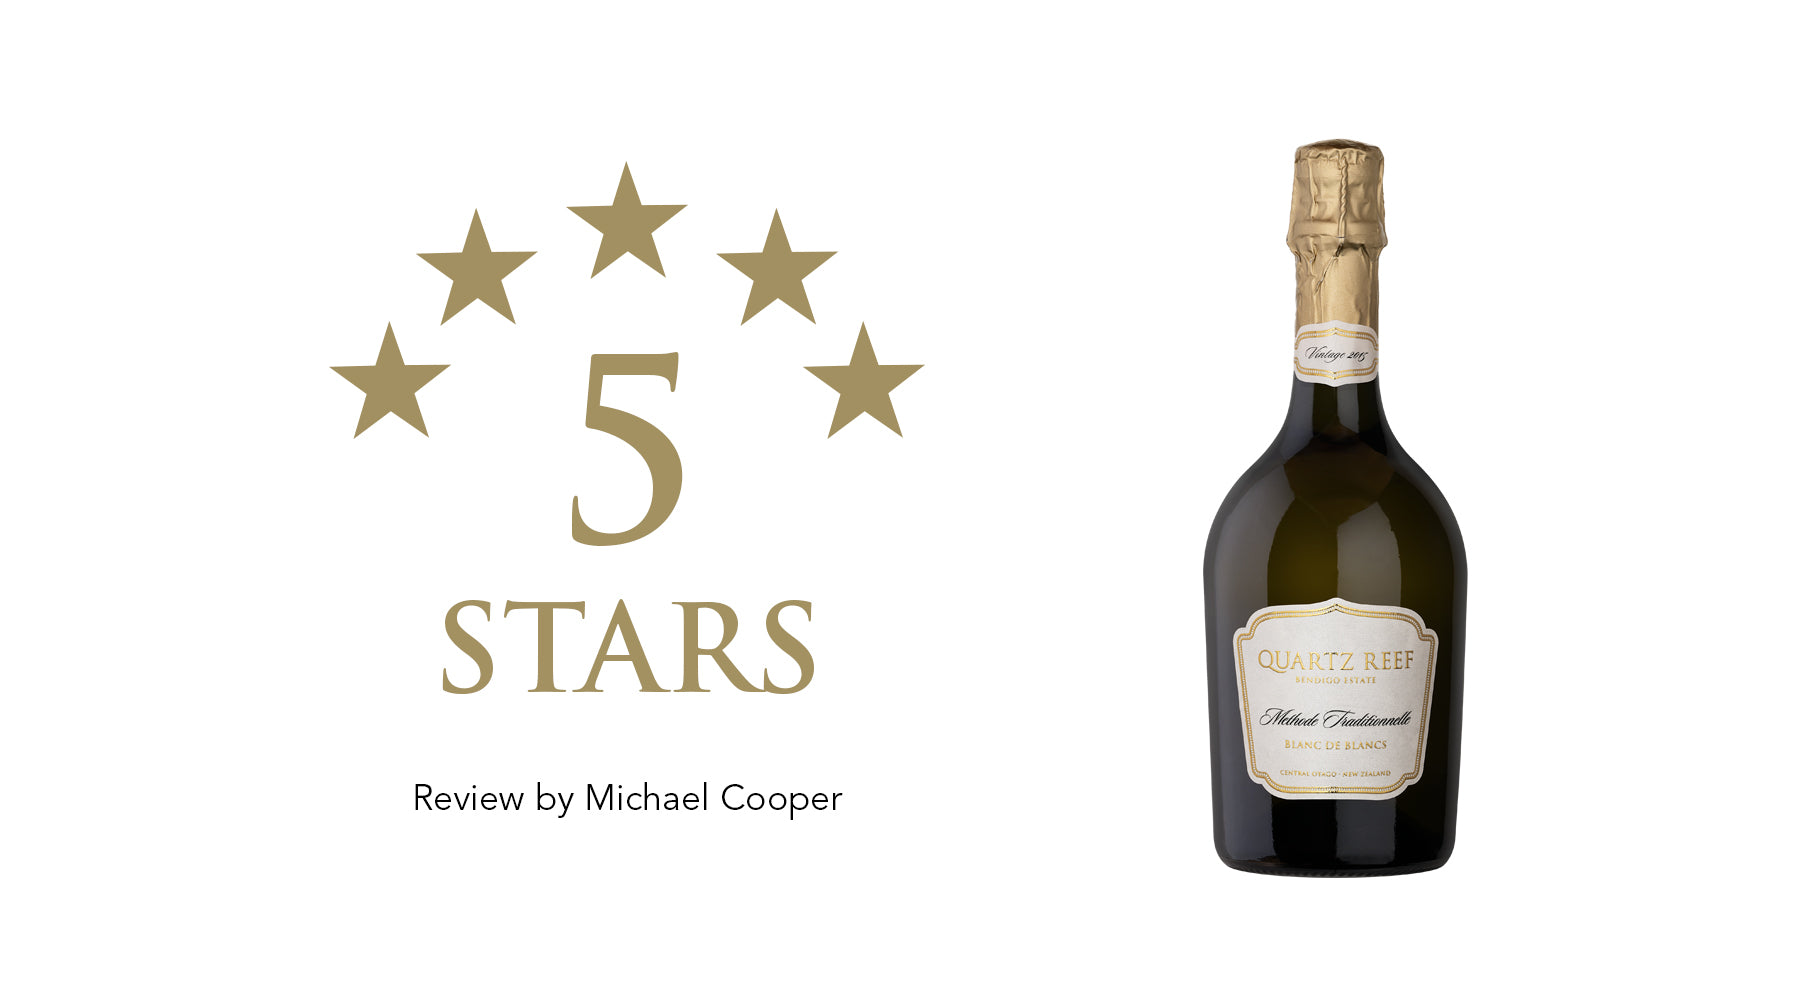 Methode Traditionnellé Vintage 2015 Blanc de Blanc - Awarded 5 Stars and Classic